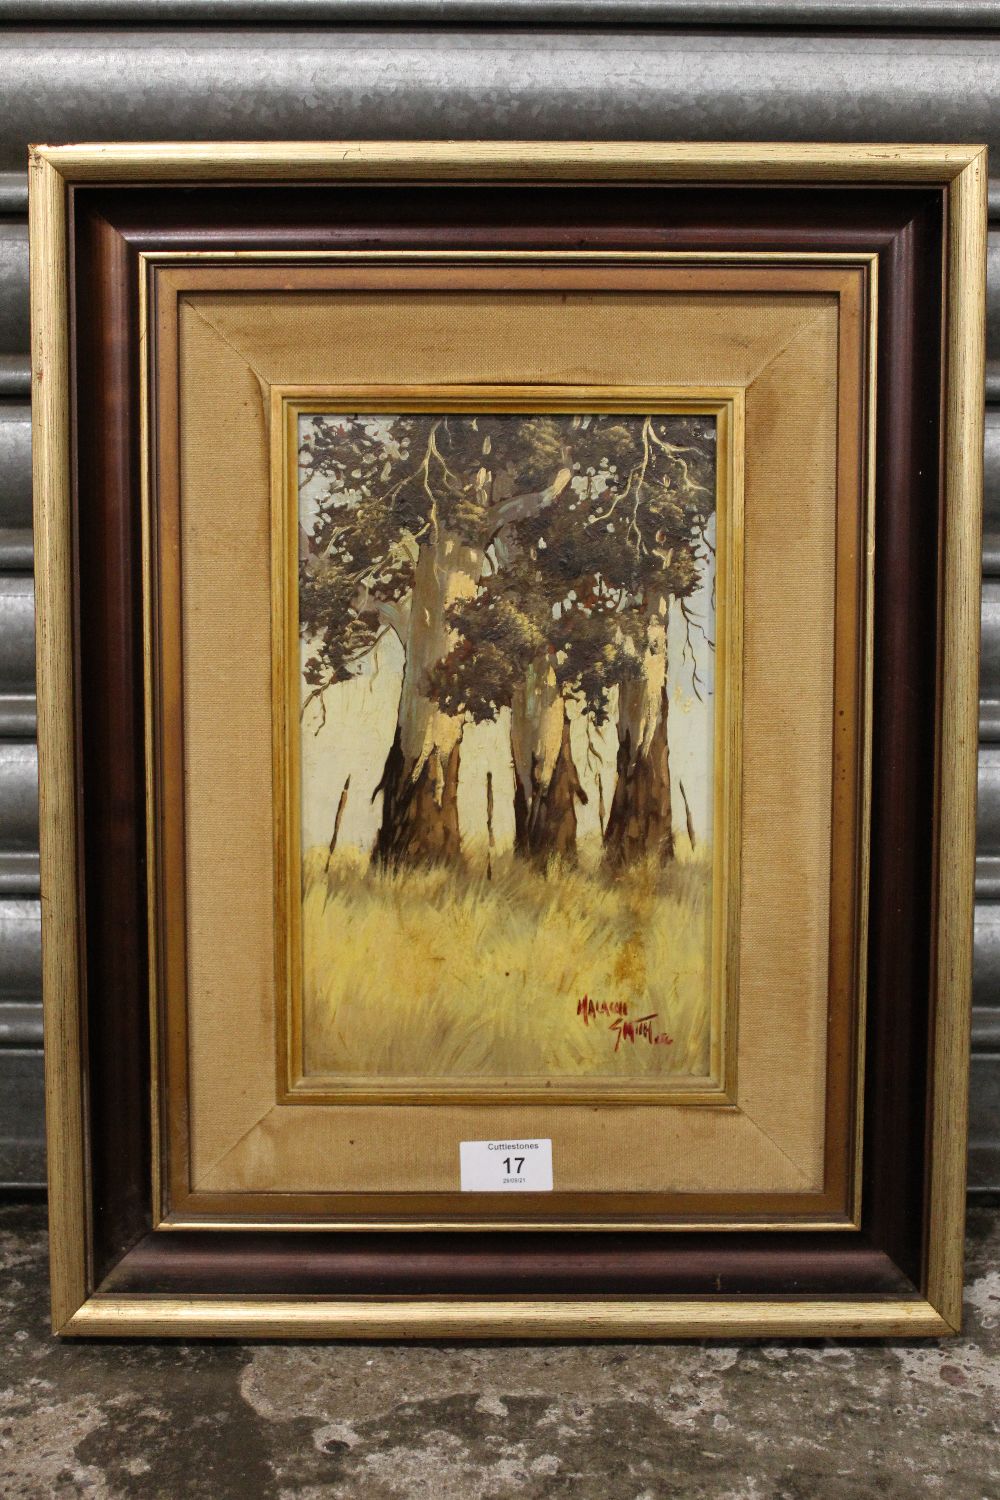 A FRAMED OIL ON BOARD STUDY OF TREE TRUNKS, SIGNED MALACHI SMITH LOWER RIGHT, OVERALL HEIGHT 48 CM - Image 2 of 3